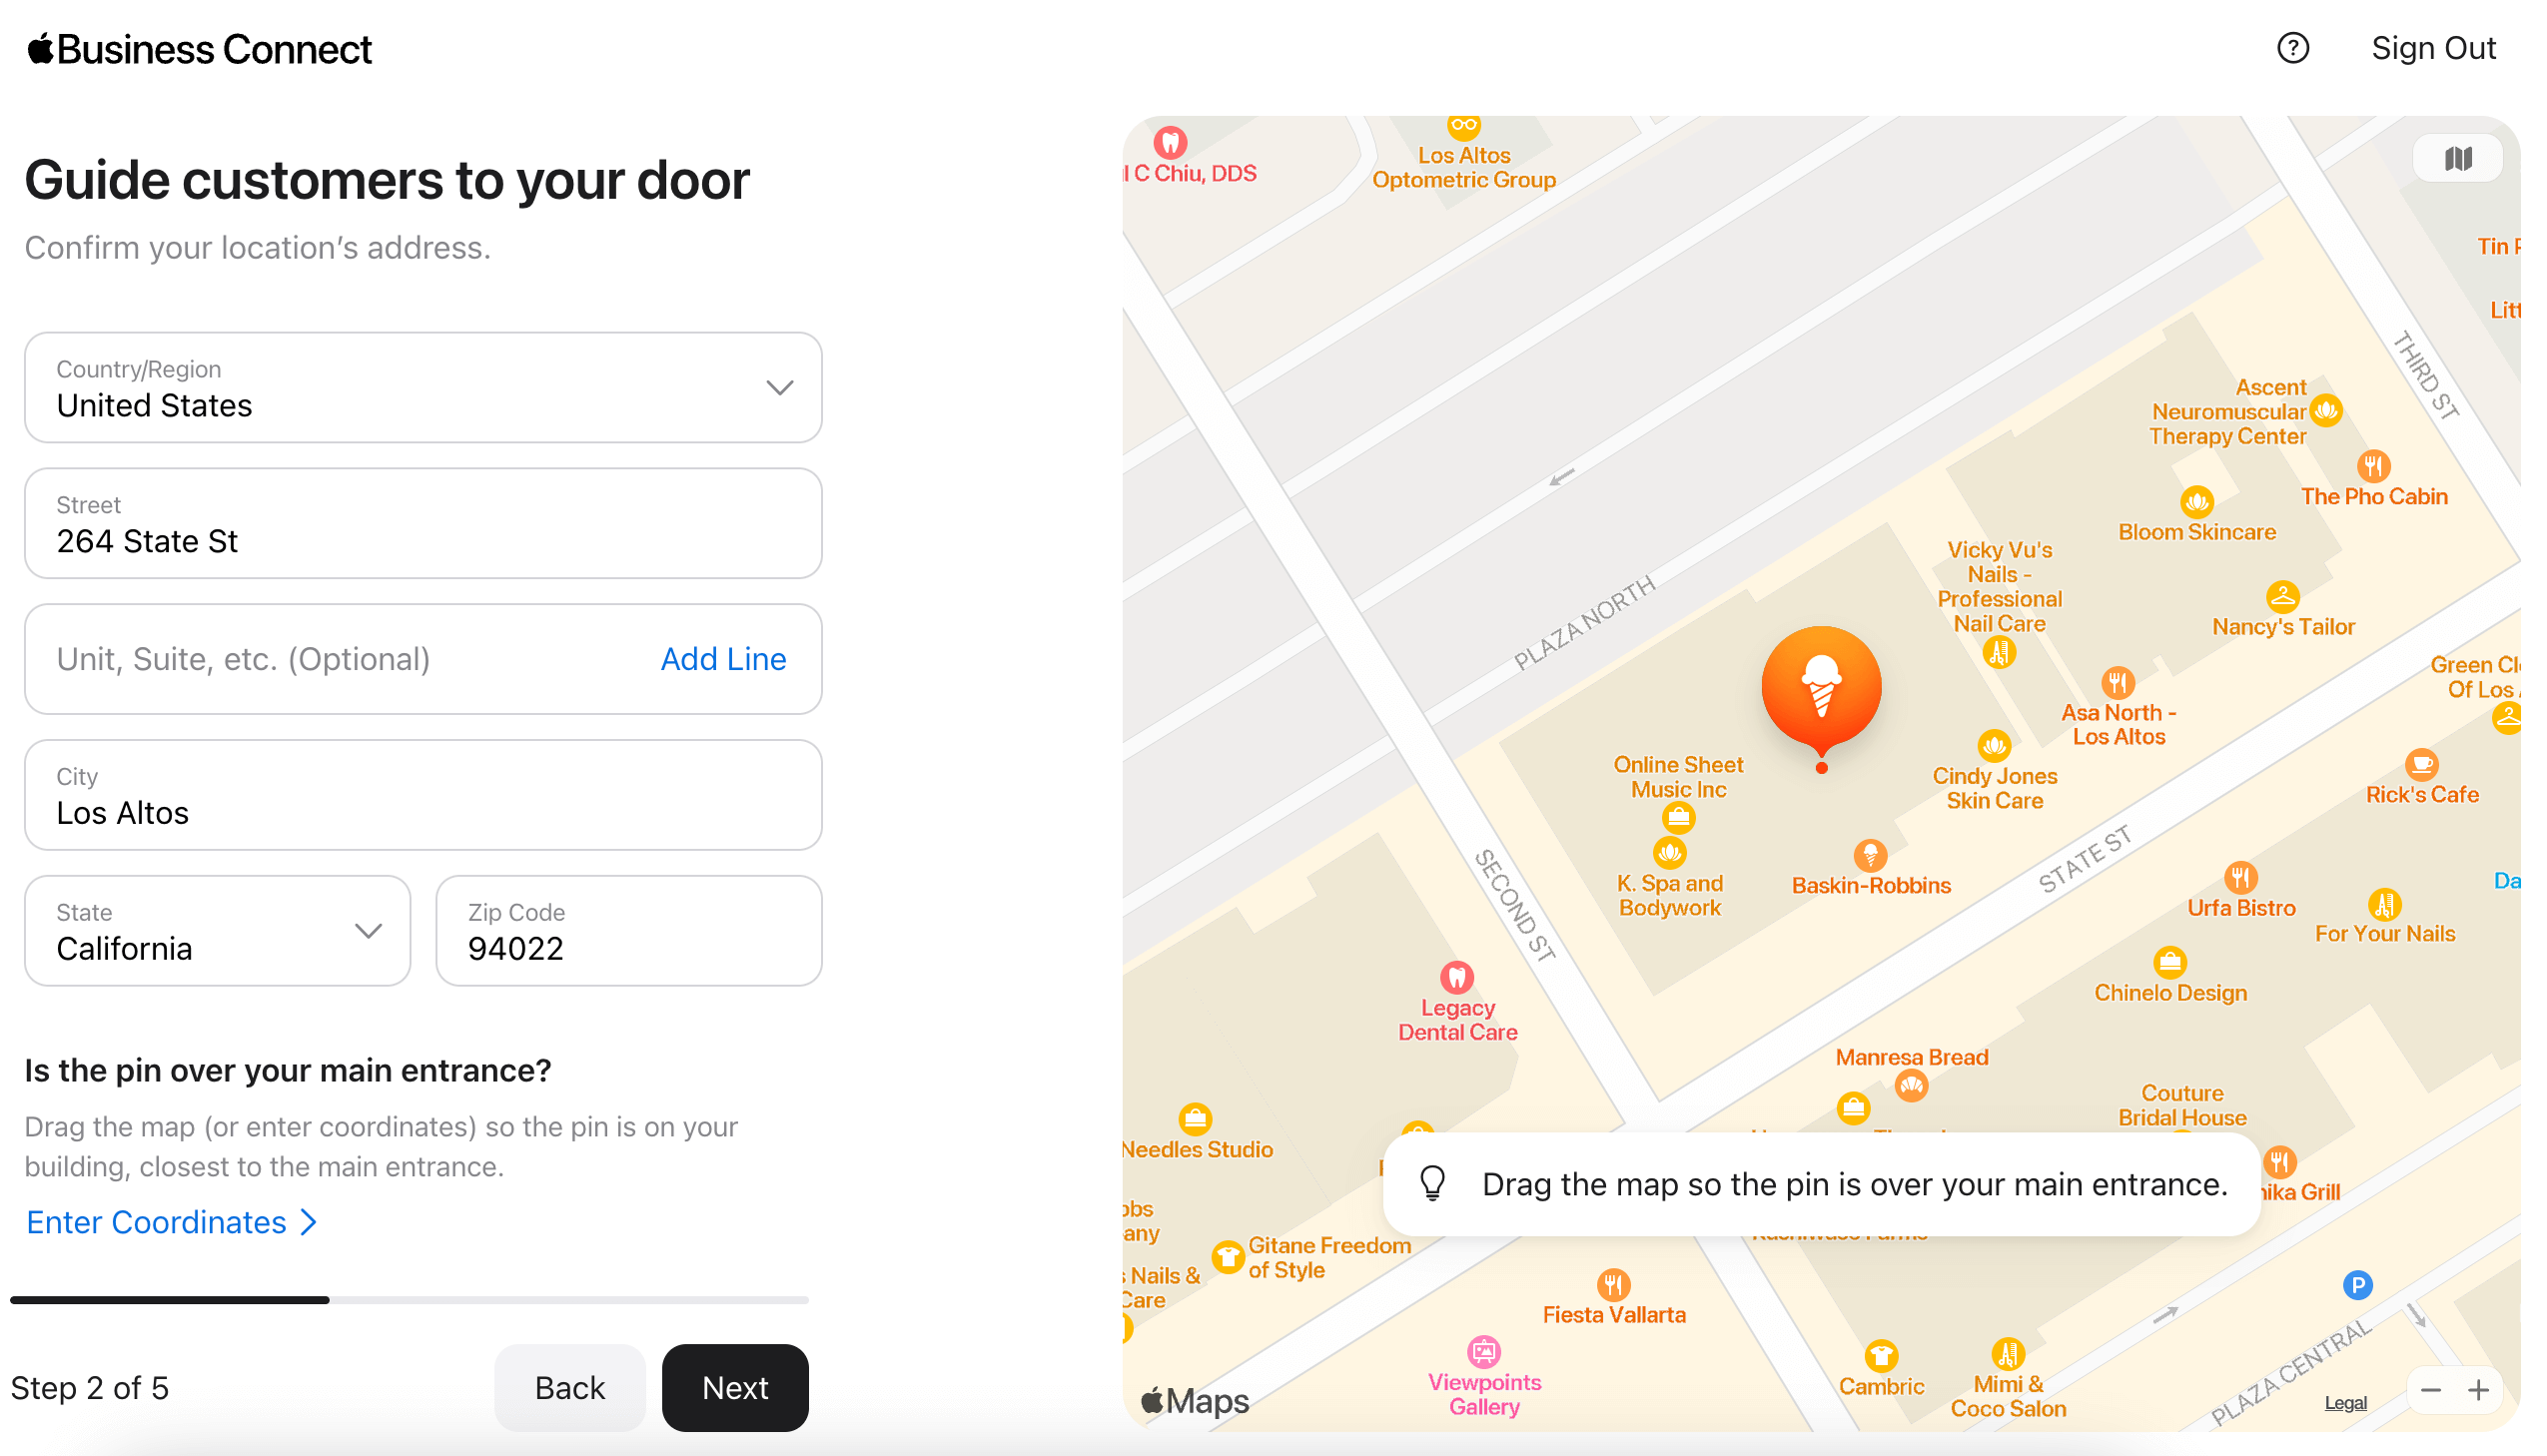 Step two of five to set up Apple Business Connect. Confirm your location's address to guide customers to your door.